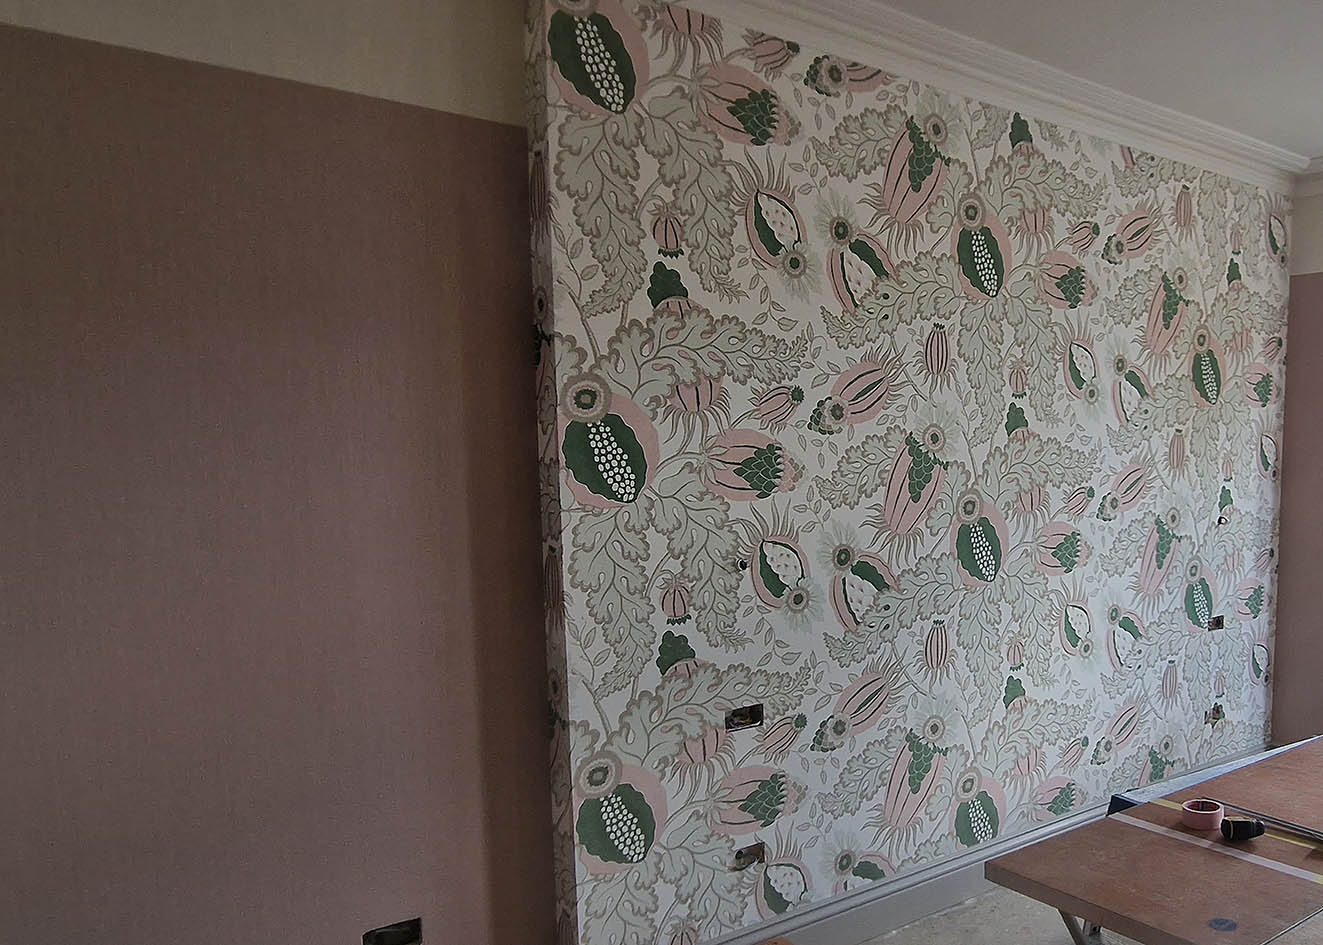 3 linen wallpapers installed by Bluespec decorating Limited wallpaper installers.